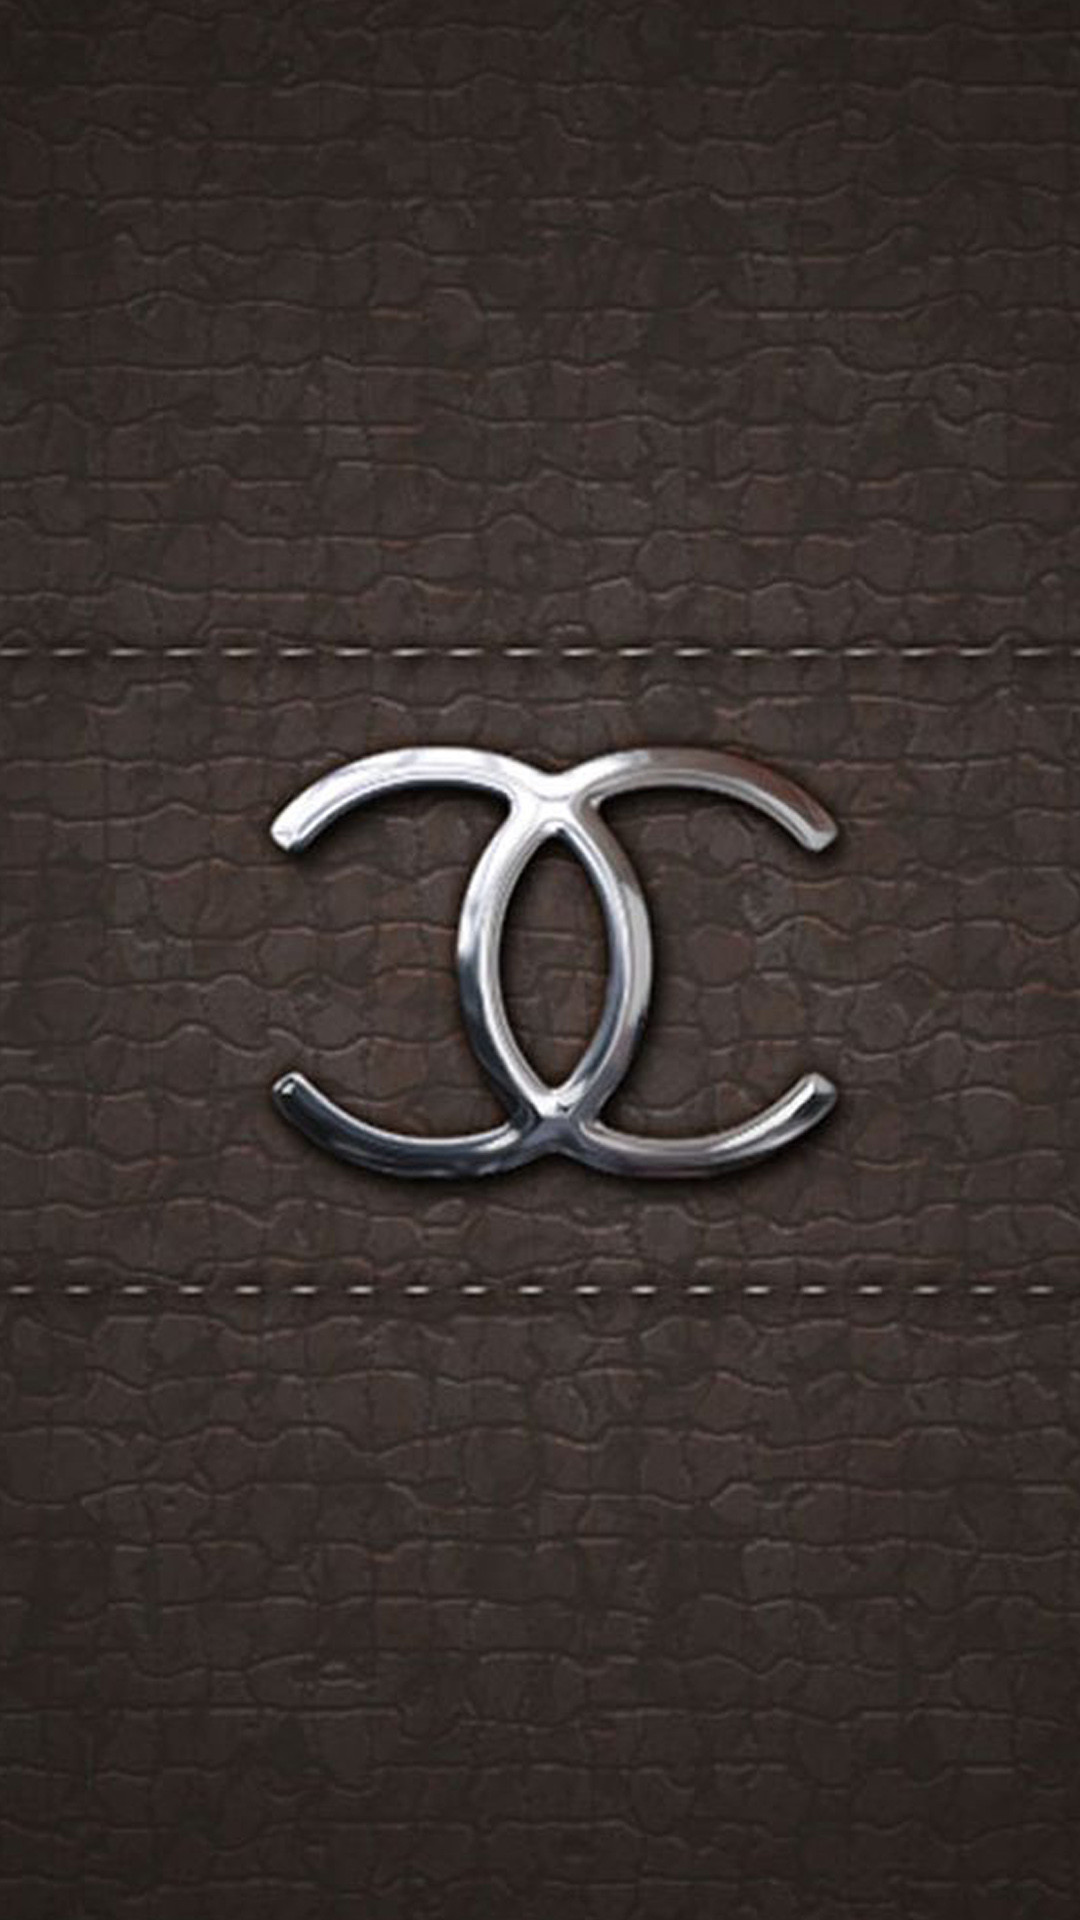 Wallpaper Wiki Free Chanel Cool Iphone Wallpapers Pic 1080x1920